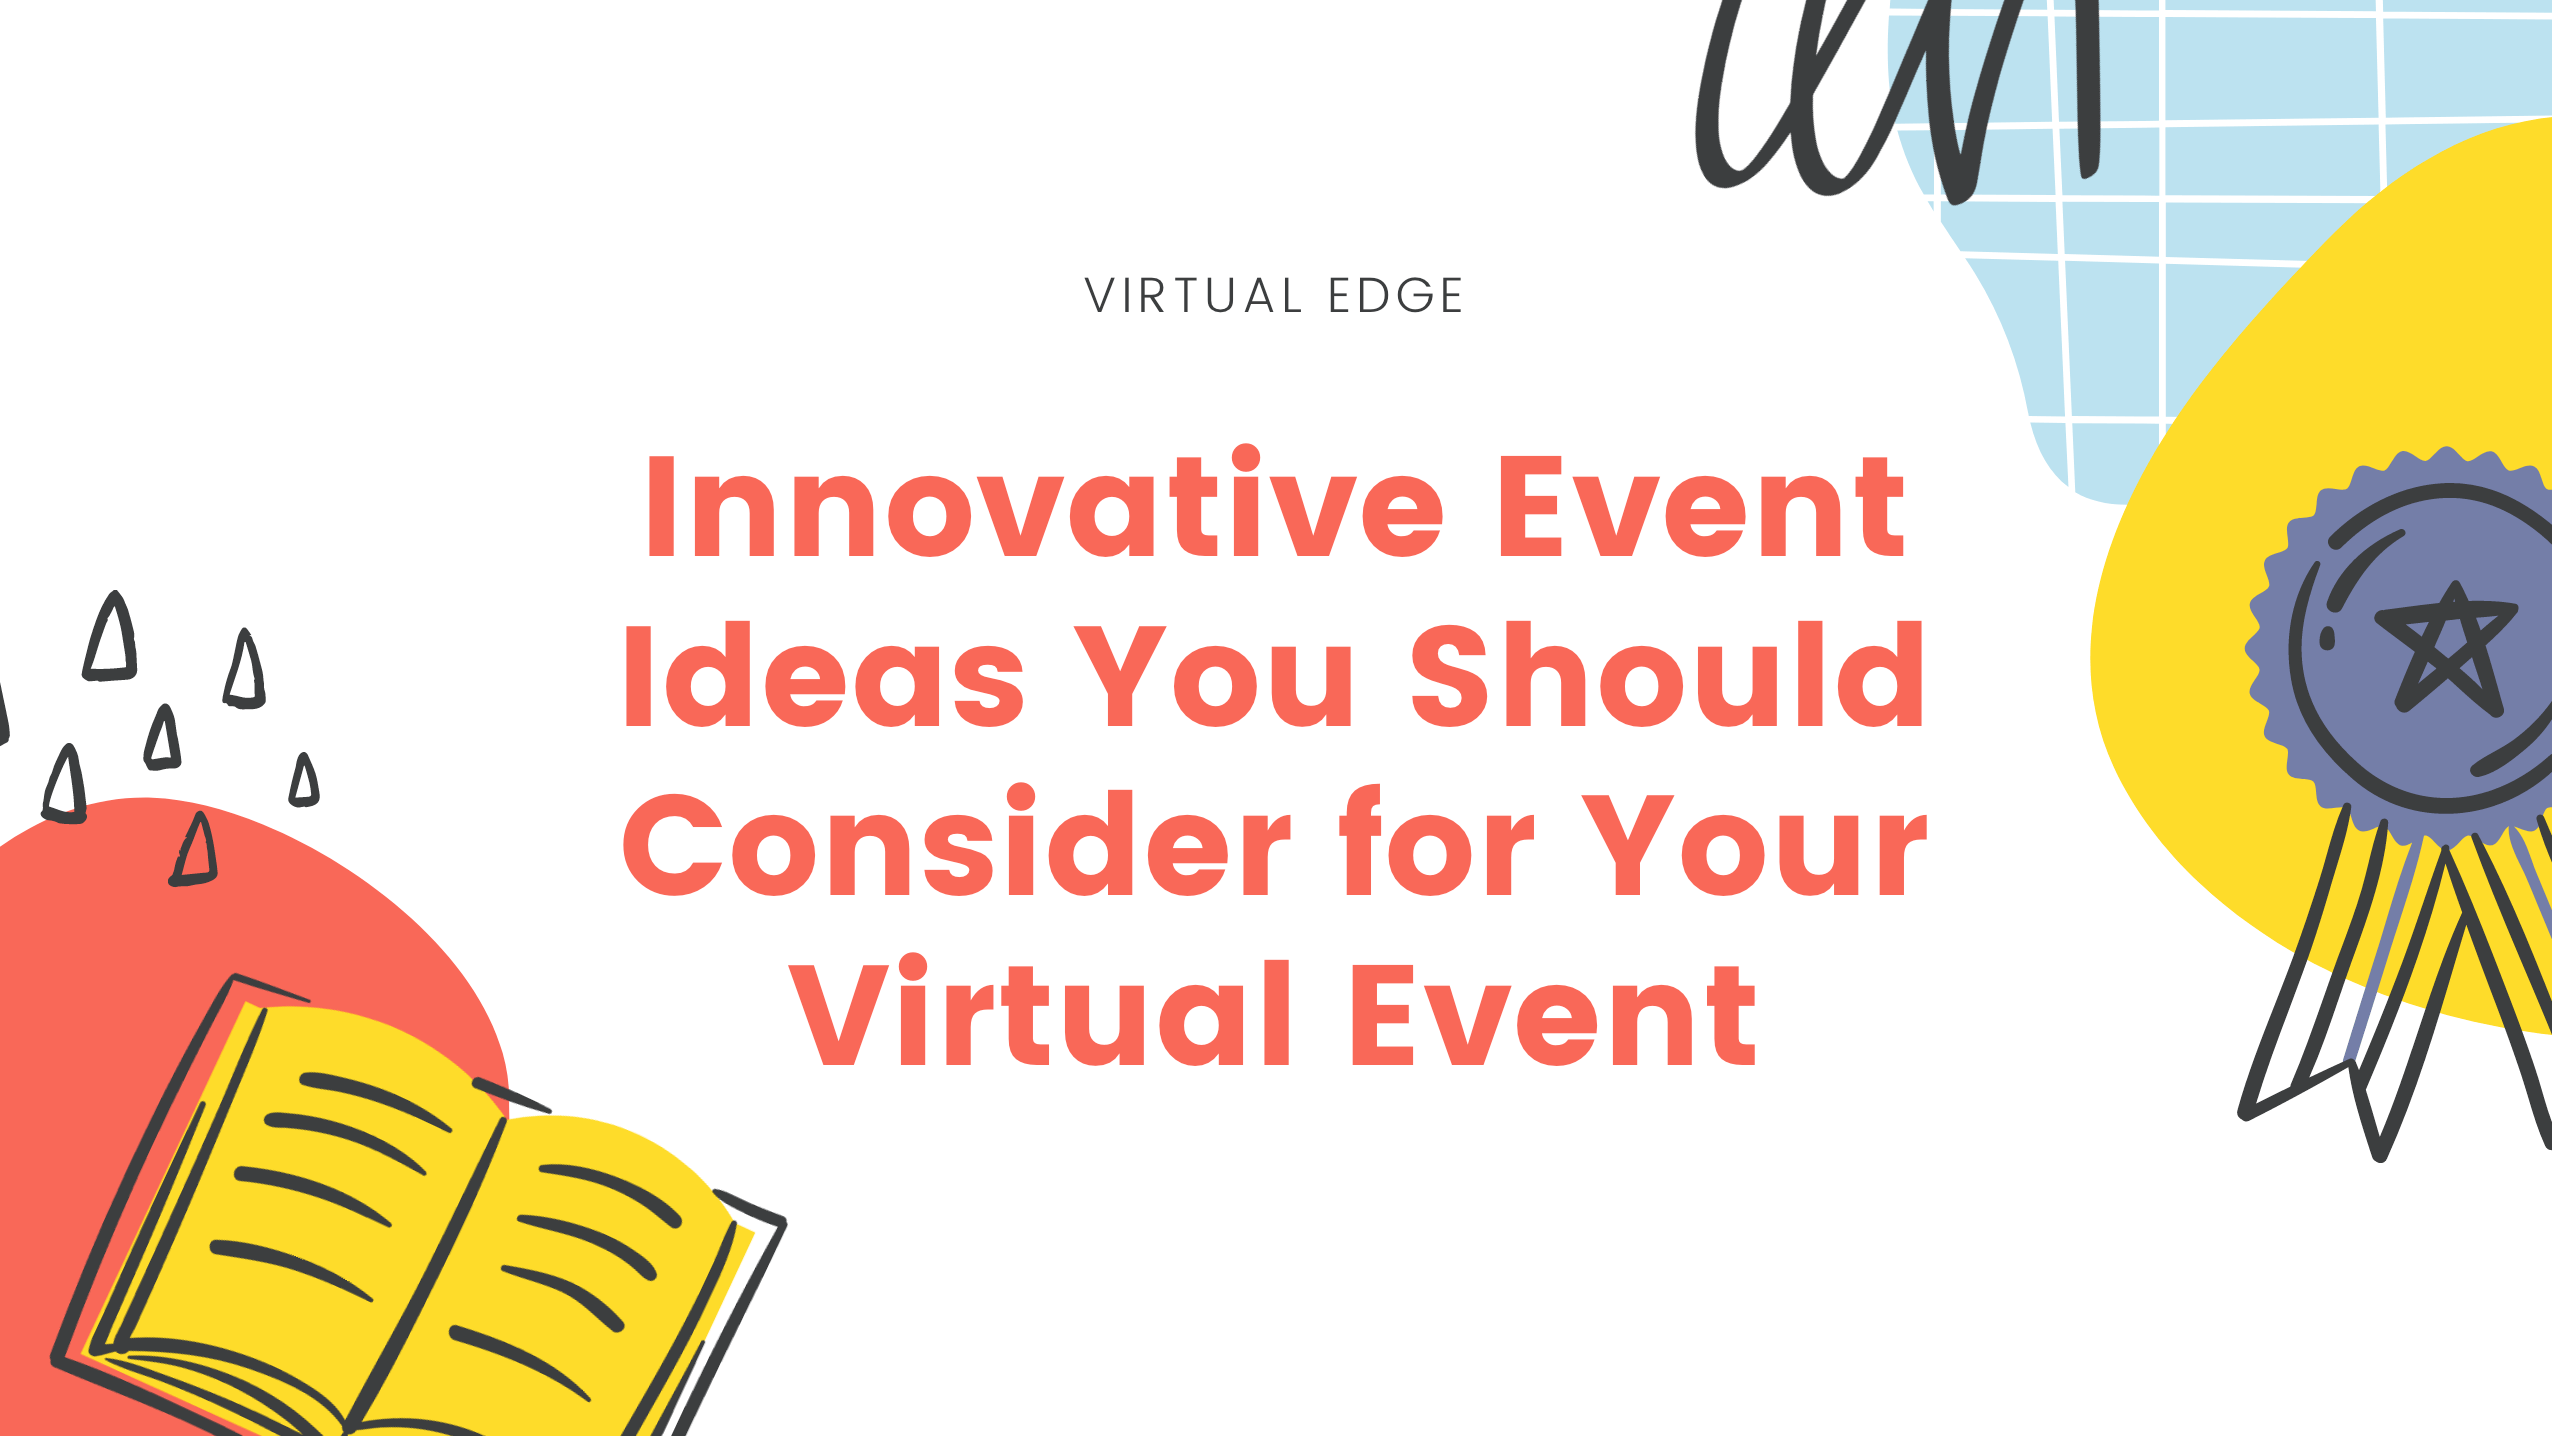 Innovative Event Ideas You Should Consider for Your Virtual Event